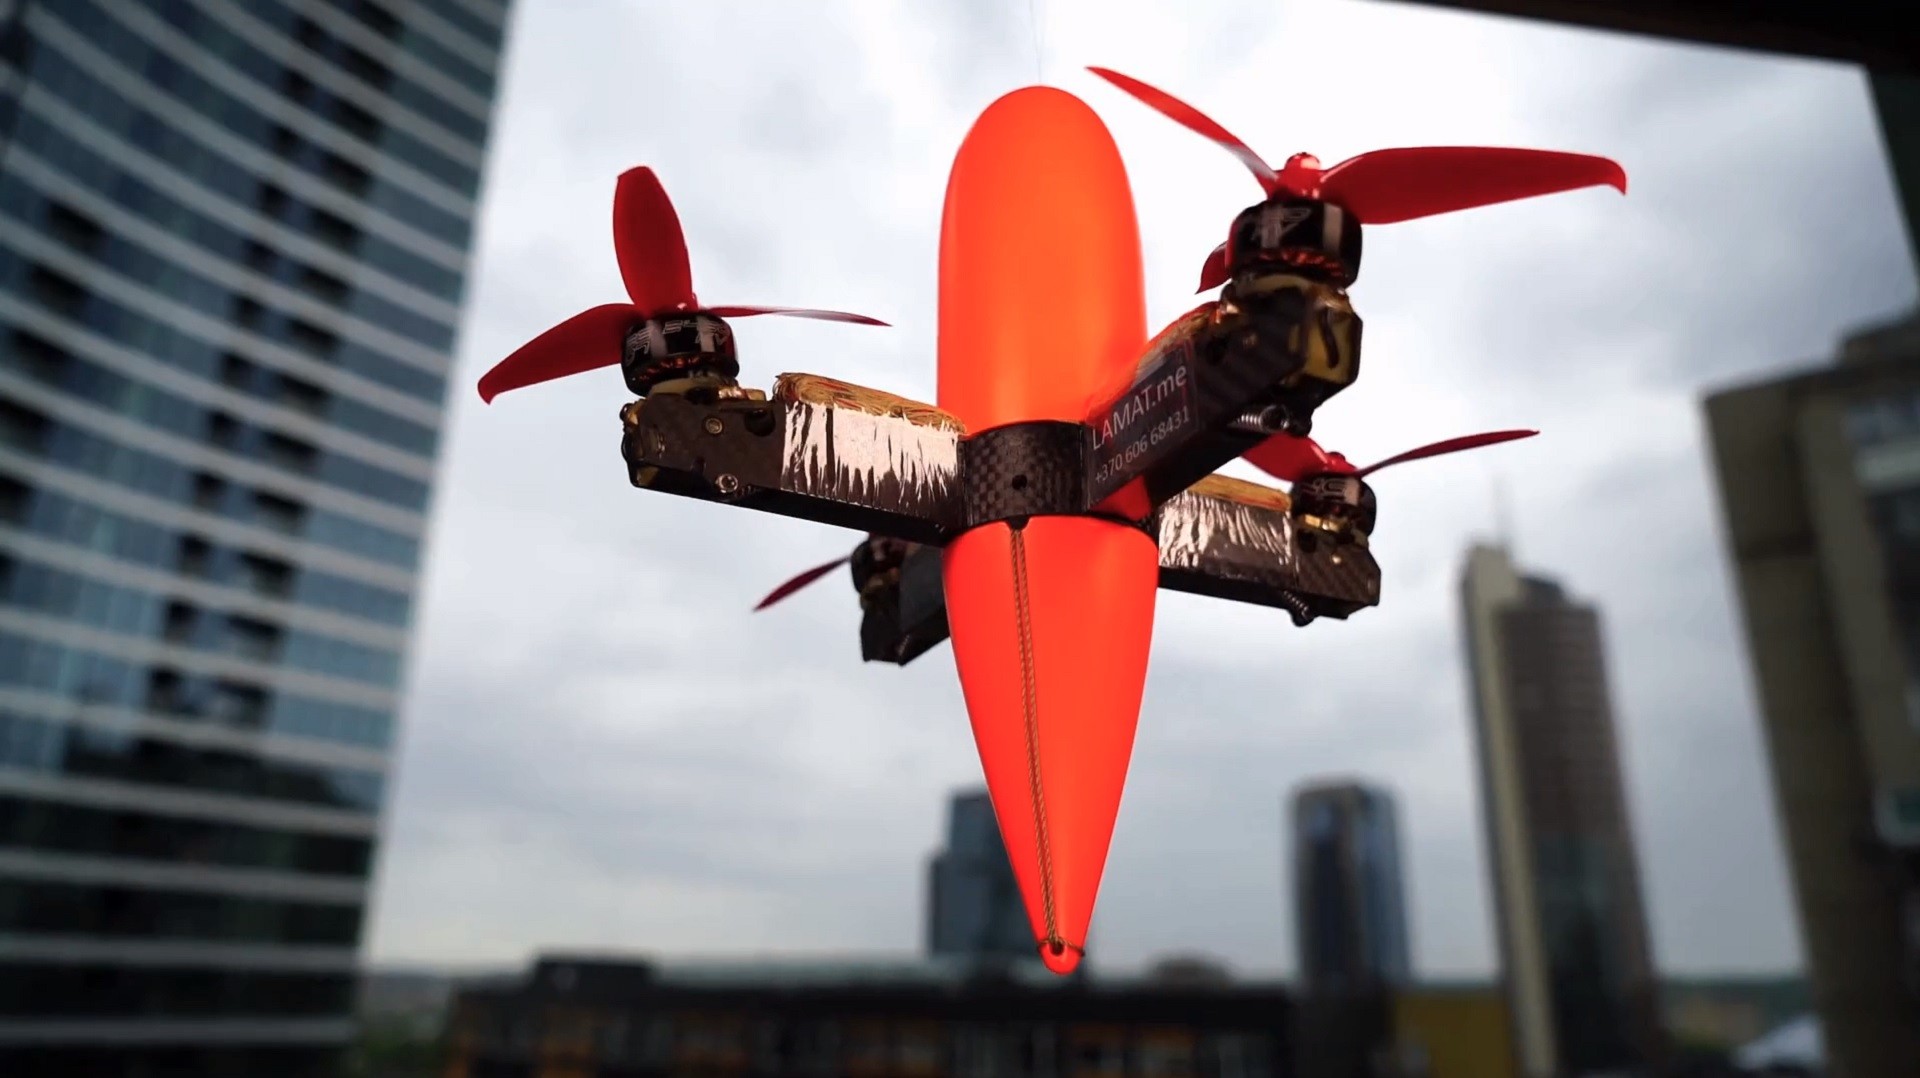 Lightweight but Powerful Drone Interceptor Catches Small UAVs in